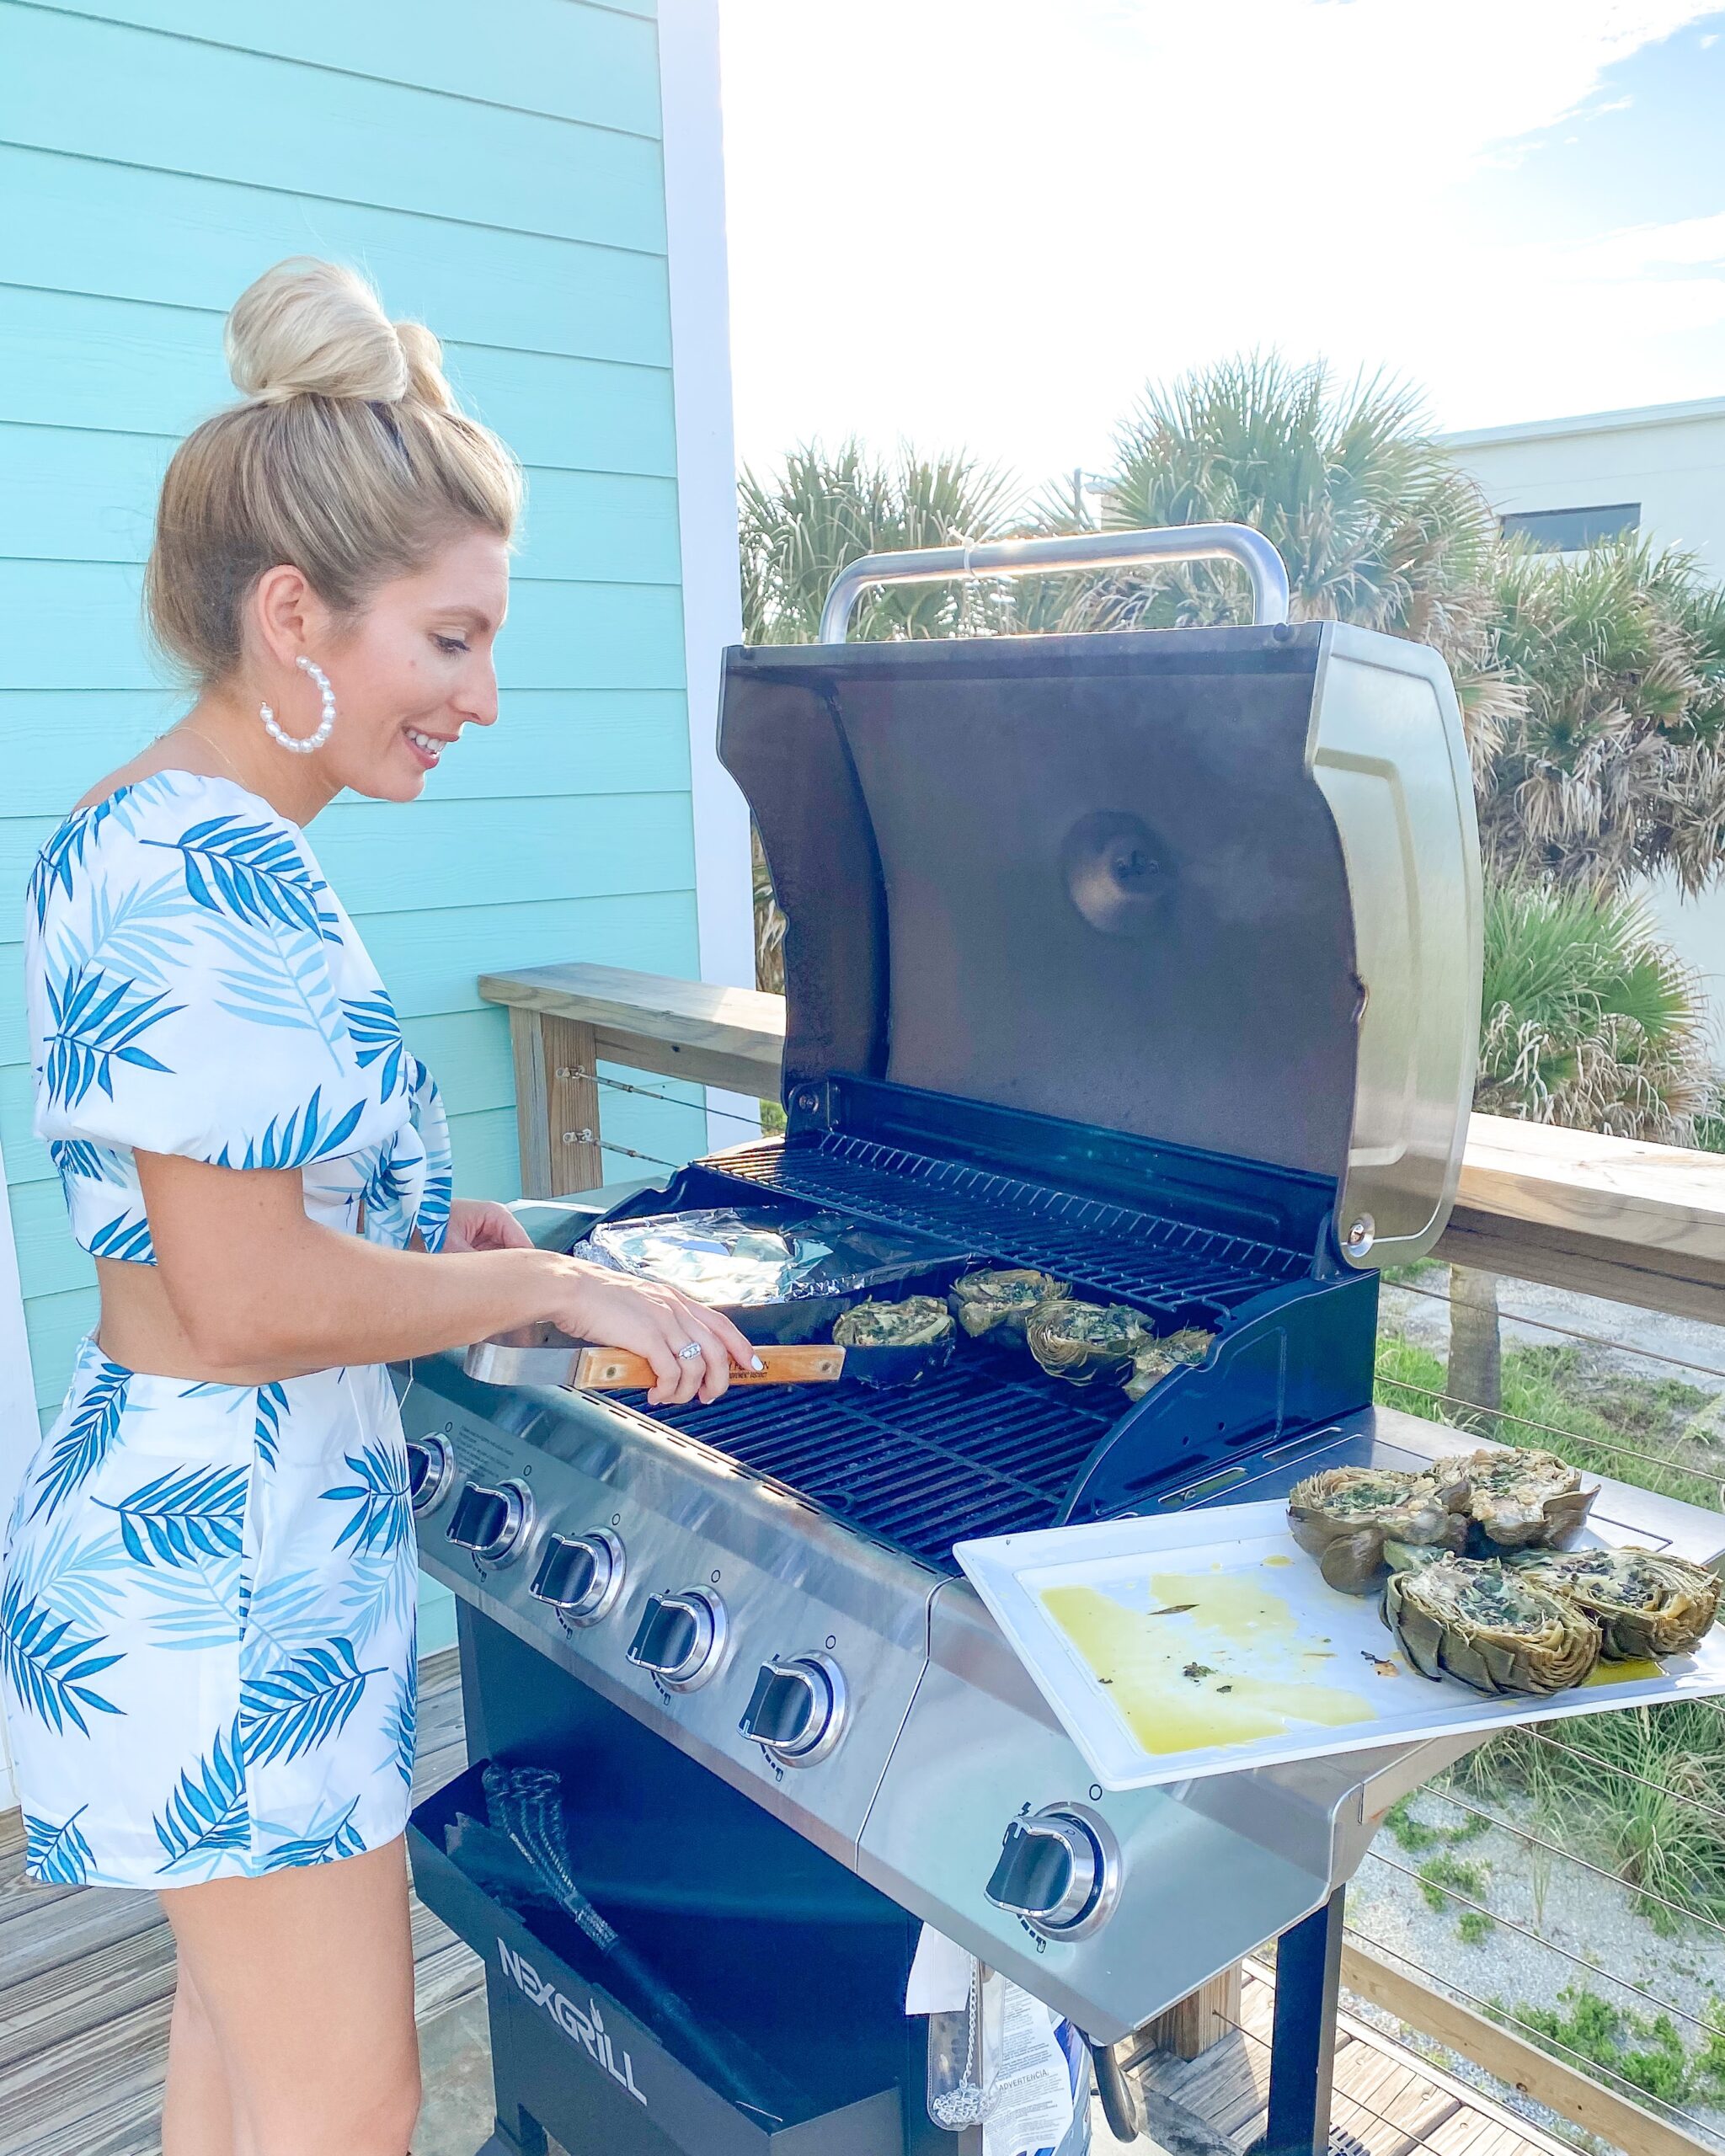 GRILLED ARTICHOKES